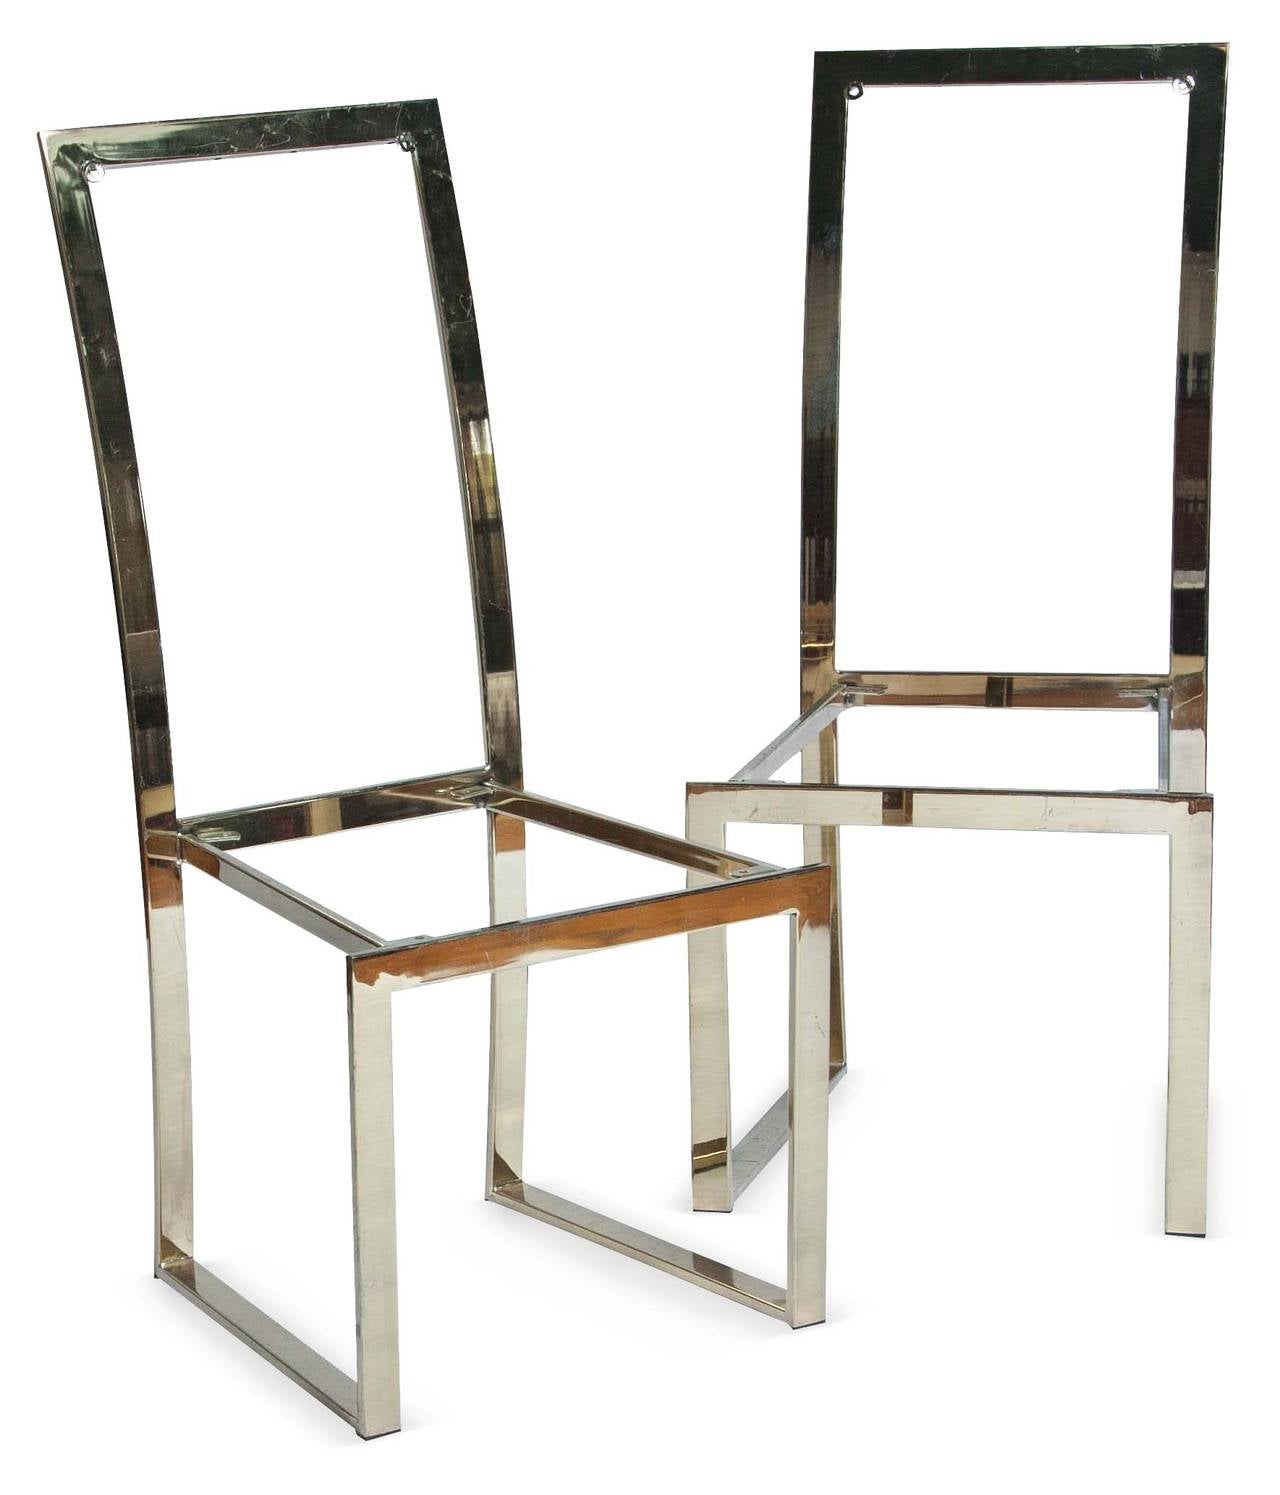 Pair of brass plated dining chair frames in the style of Milo Baughman.